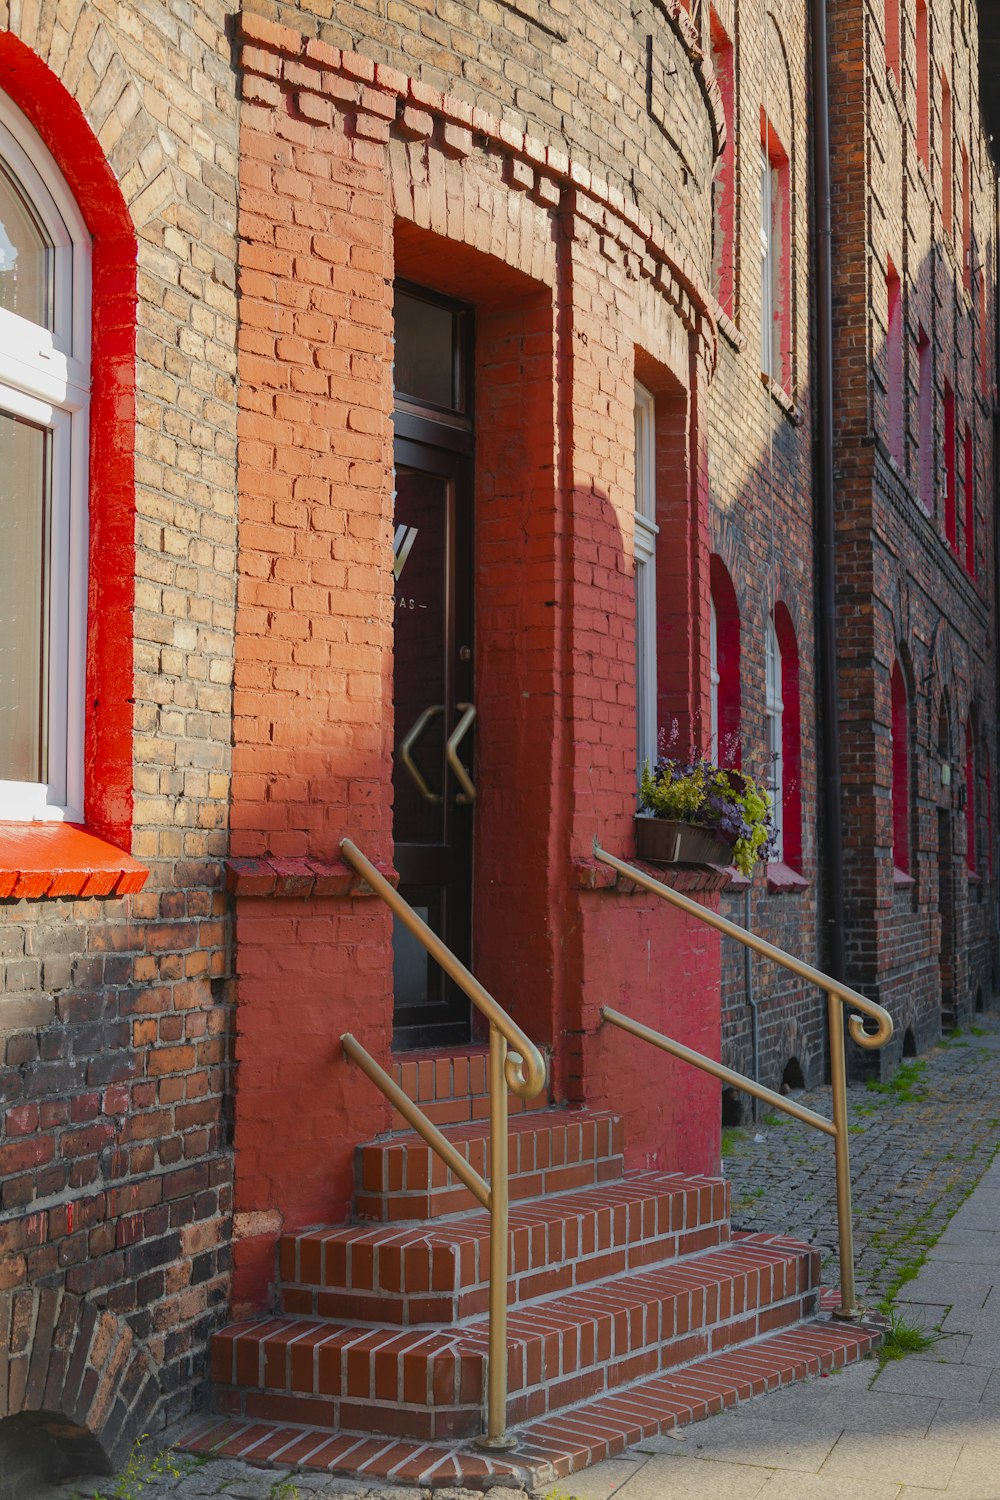 a red brick building with stairs leading up to it